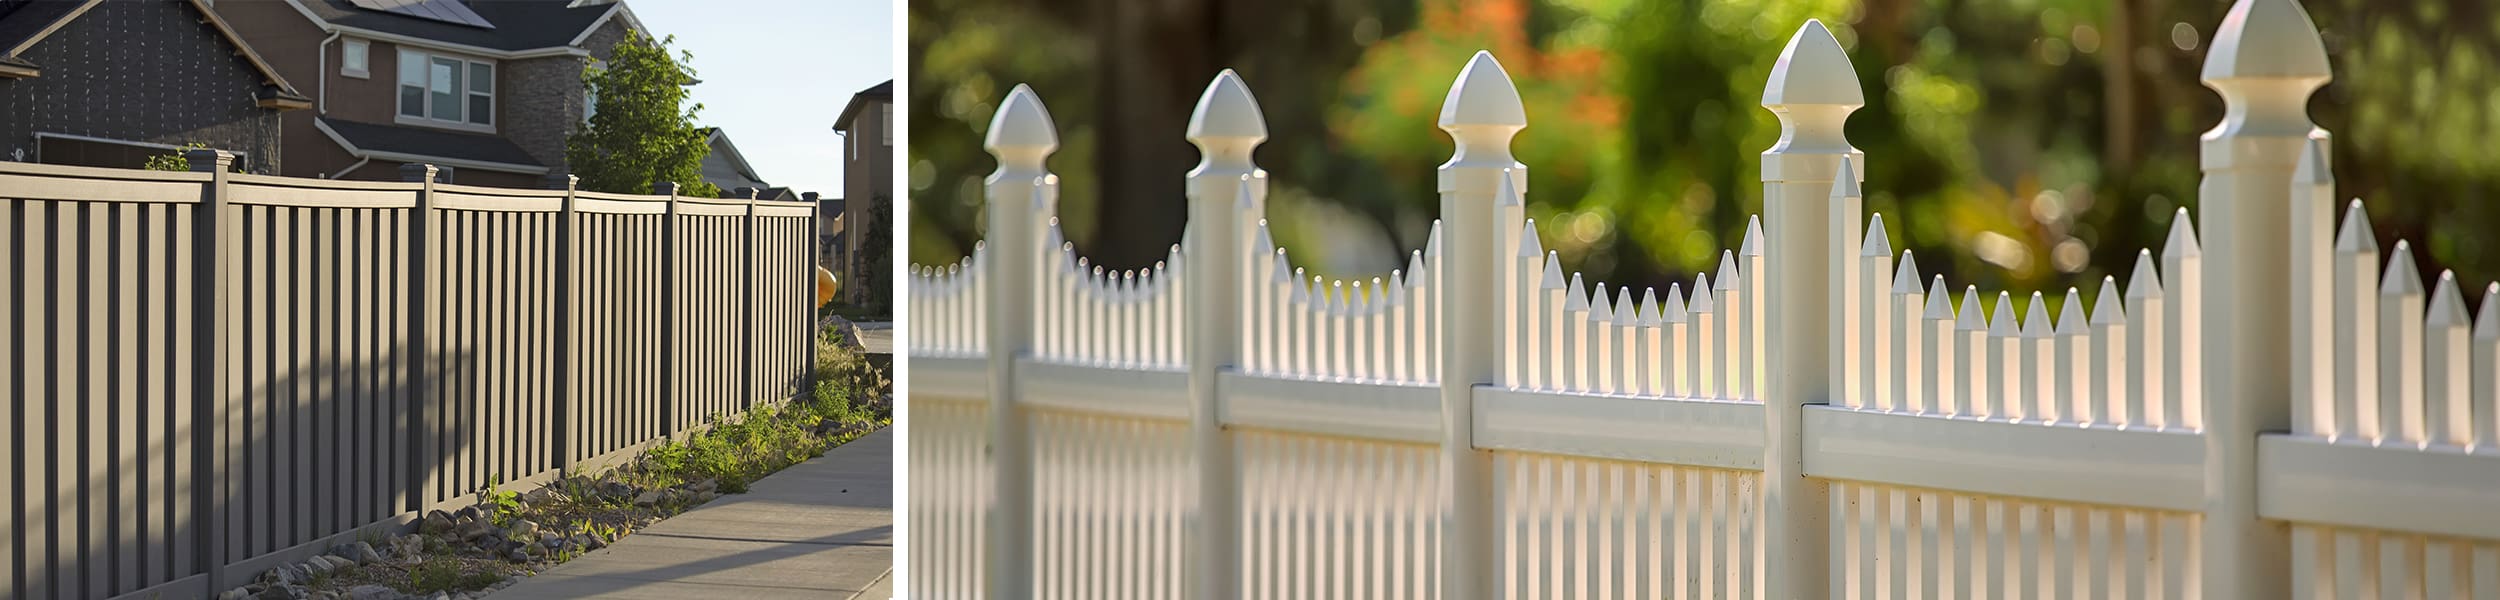 Aurora Material Solutions offers an exceptionally durable line of compounds for fencing & outdoor applications, including rigid PVCs & cellular foam rigid PVC products.